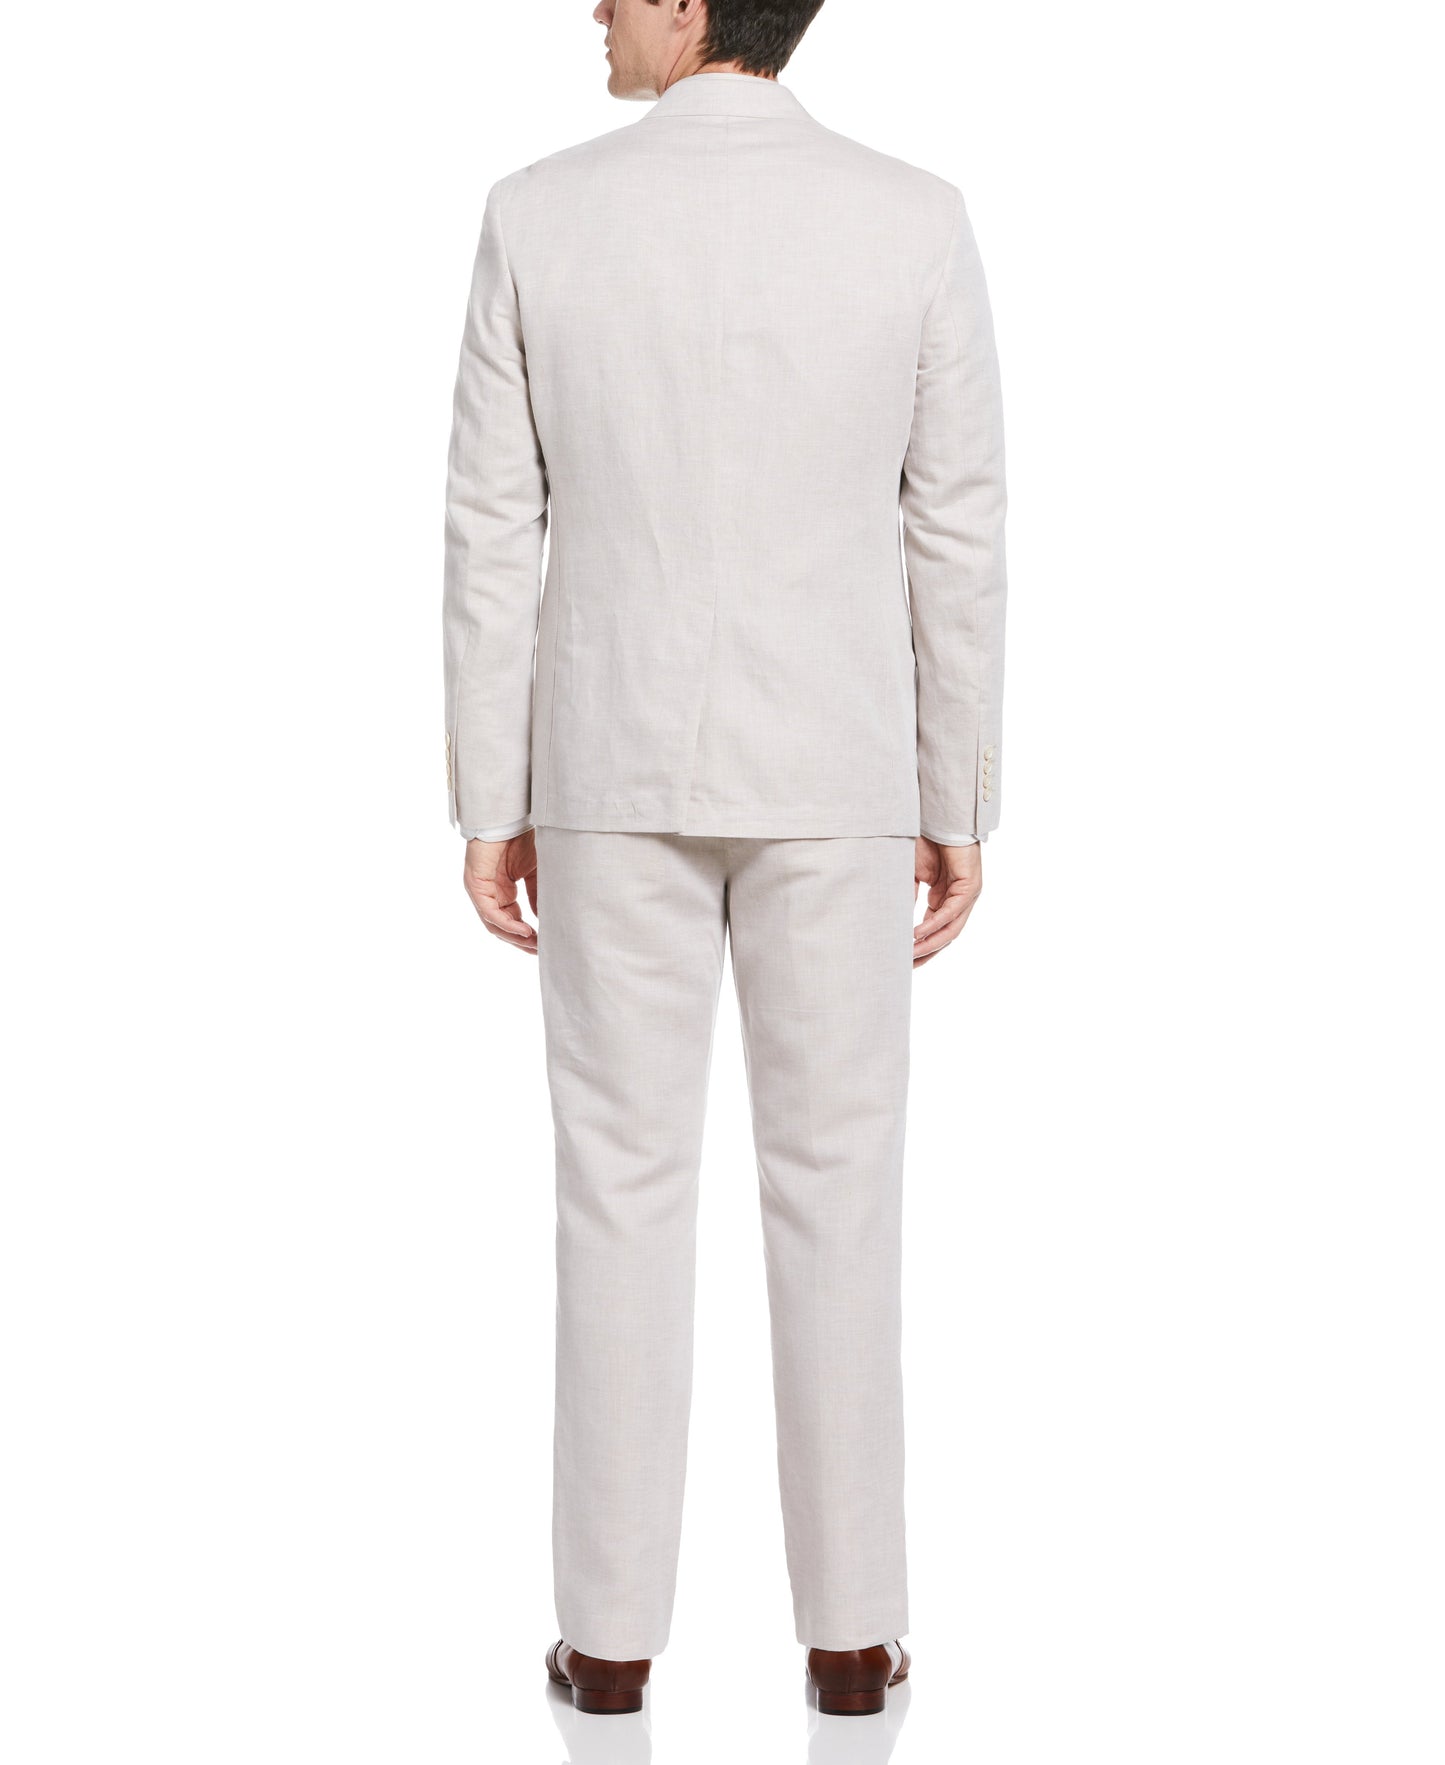 Linen Blend Solid Twill Suit